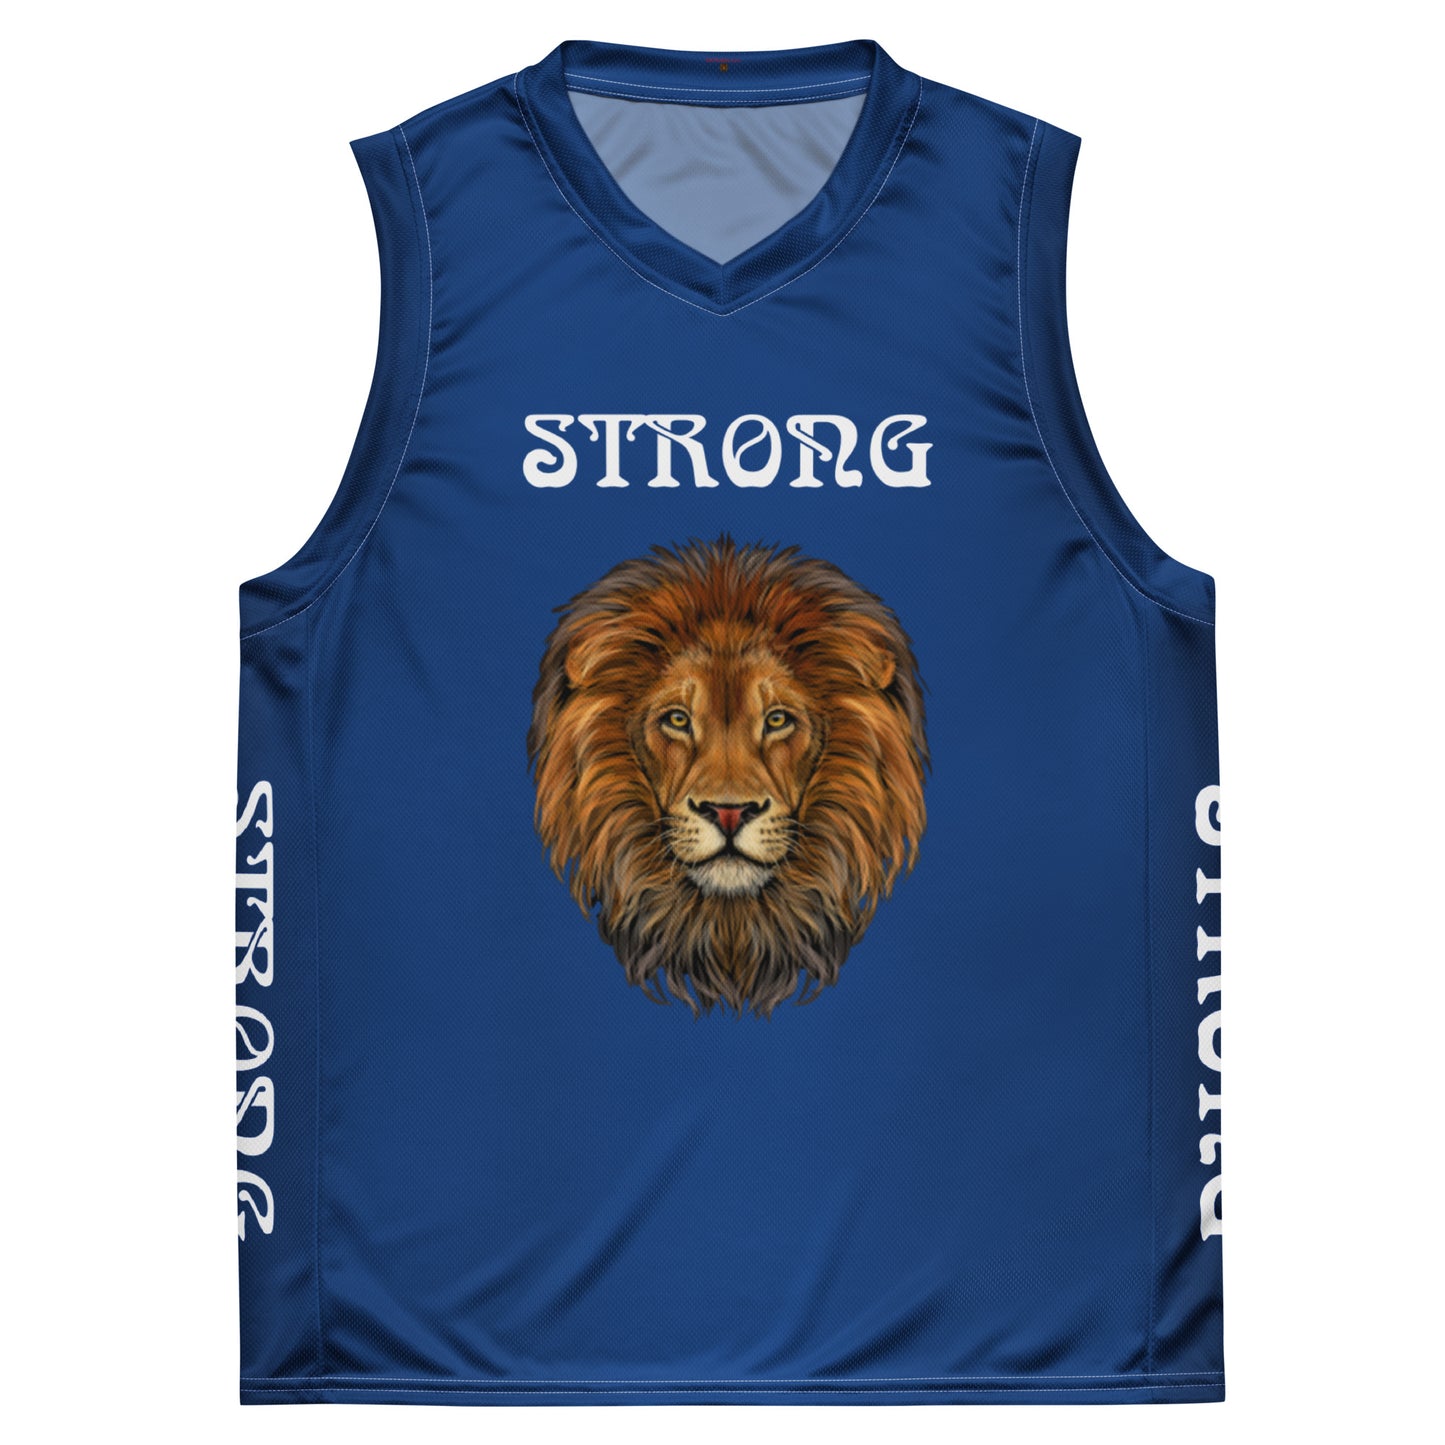 “STRONG”Blue Unisex Basketball Jersey W/White Font